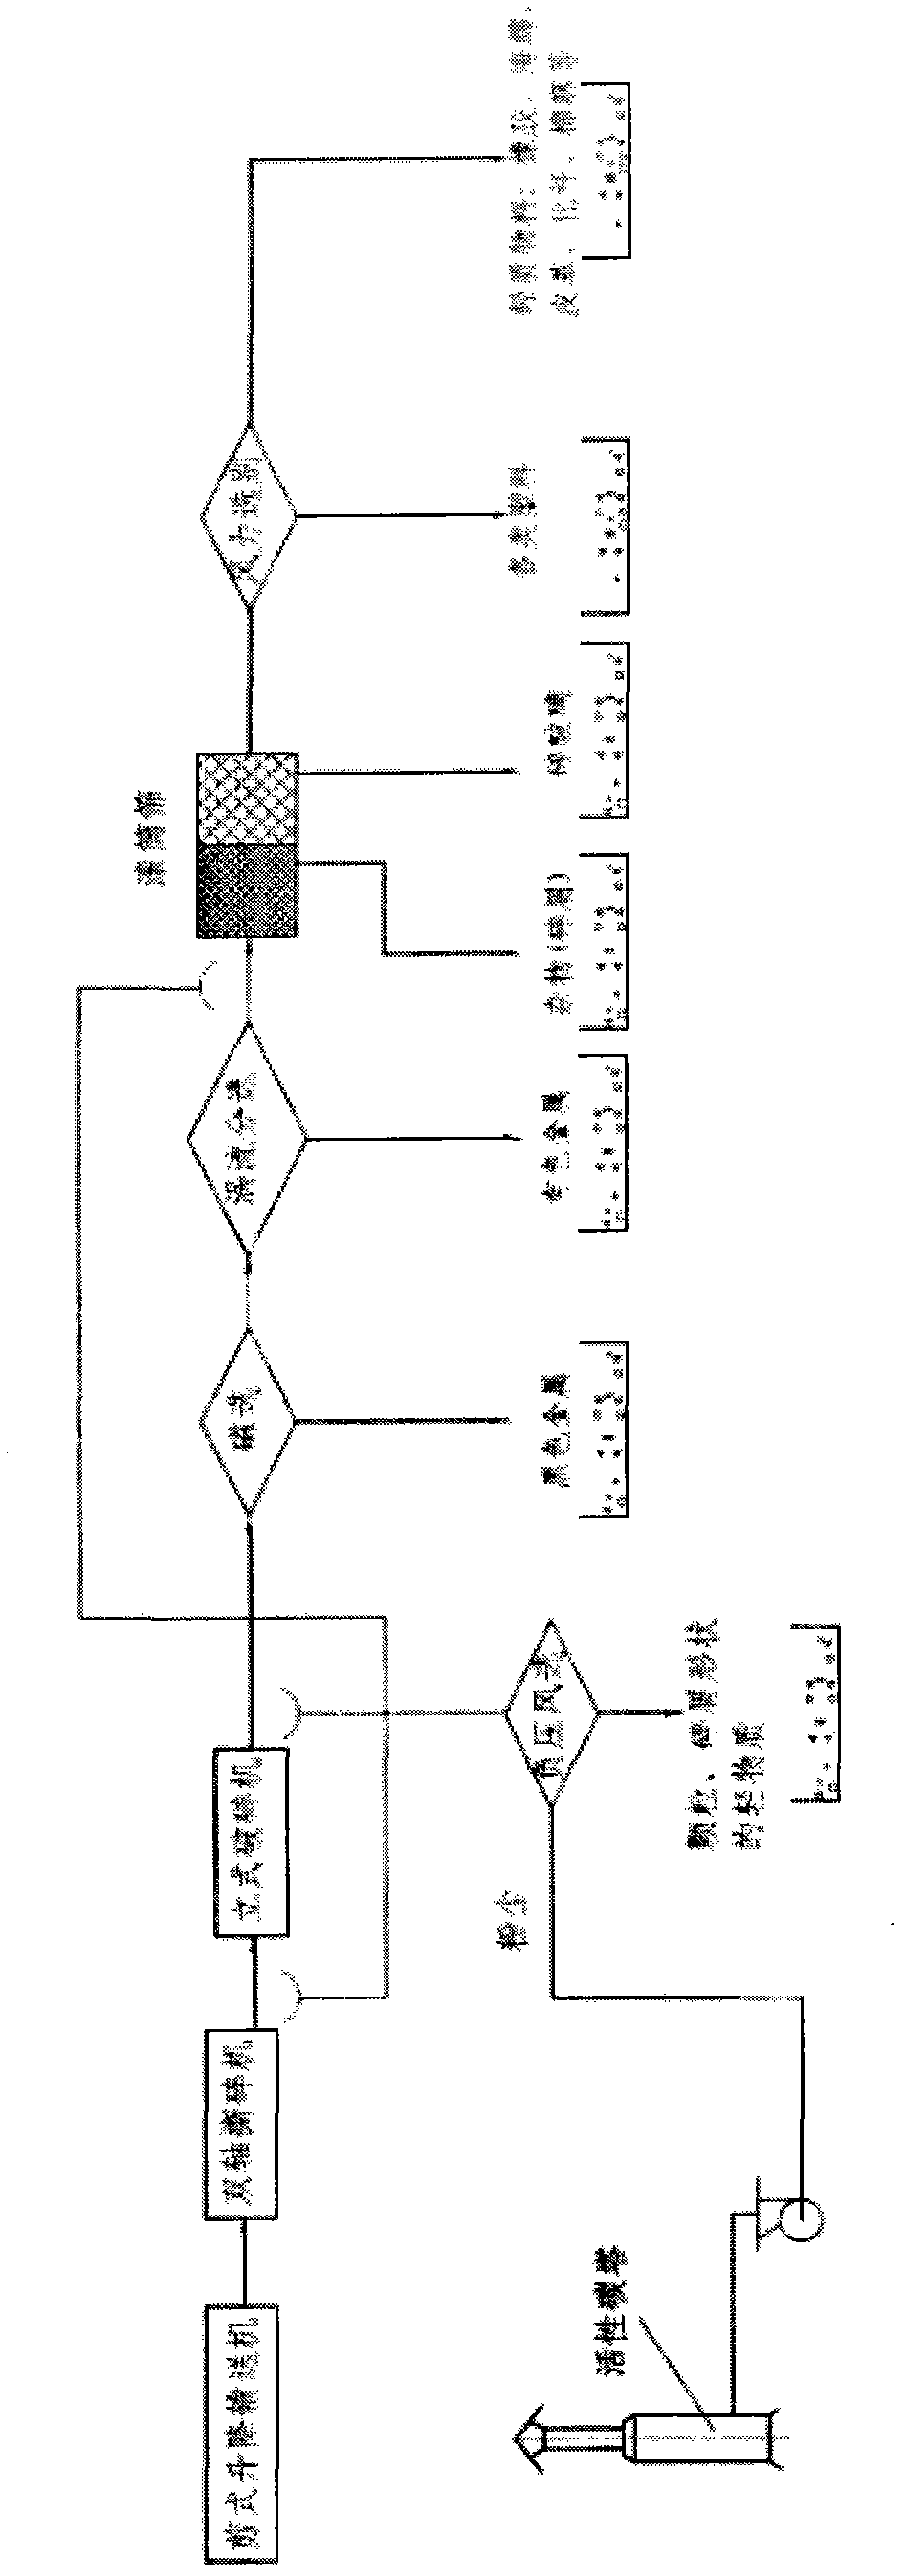 Fragmentation separation process flow for end-of-life automobile body